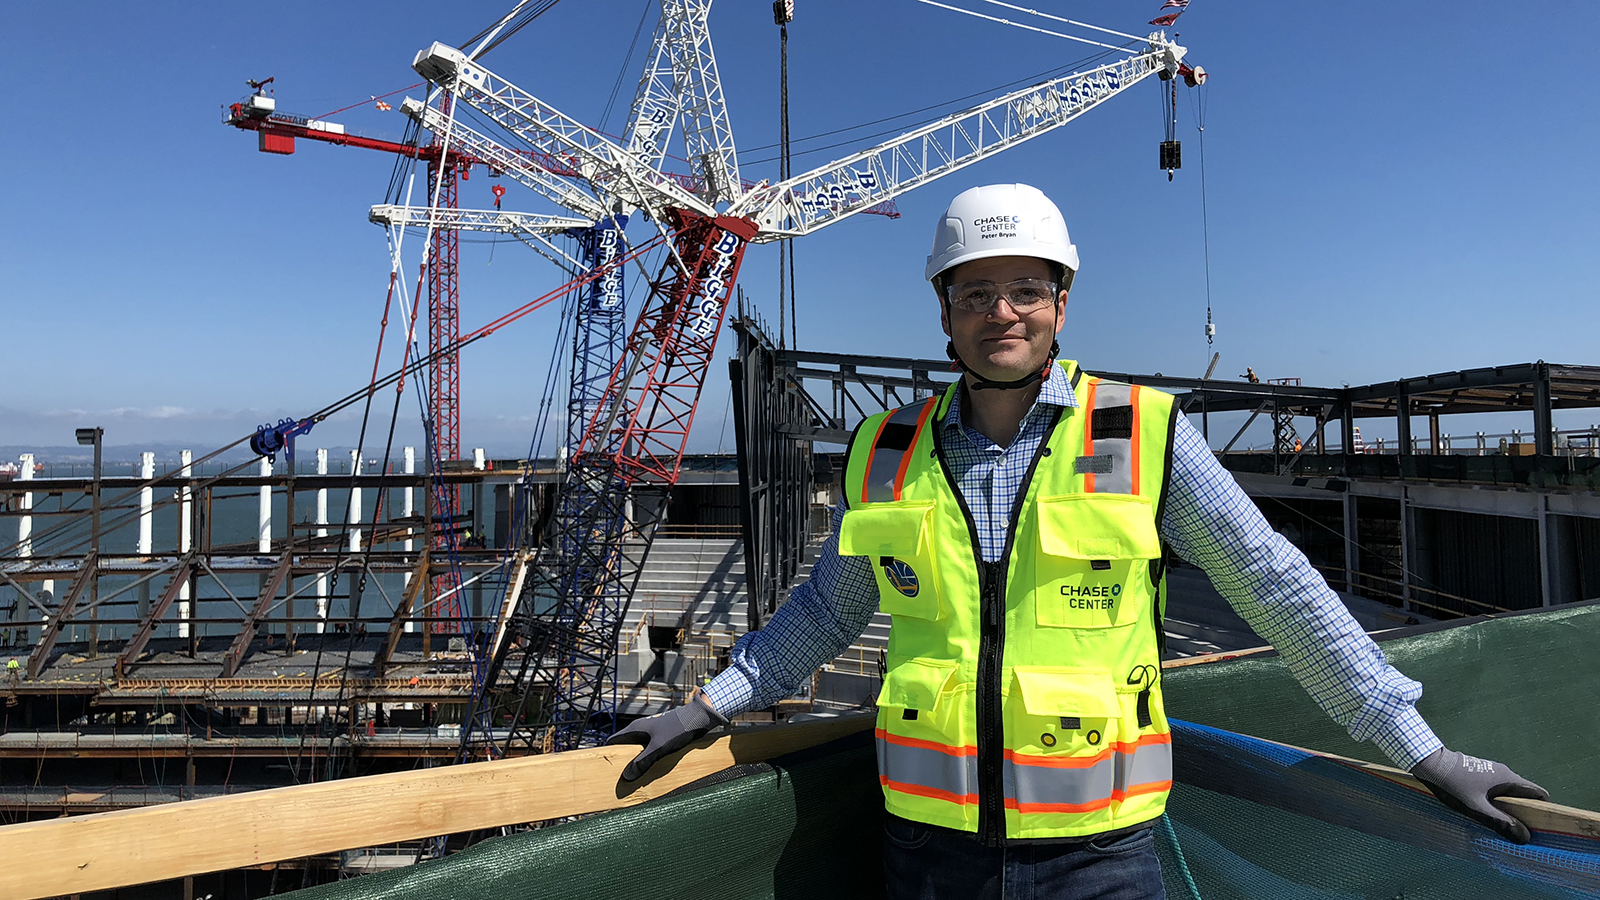 A man stands with a white hard hat and a neon green safety vest in front of a large multi-armed crane over water